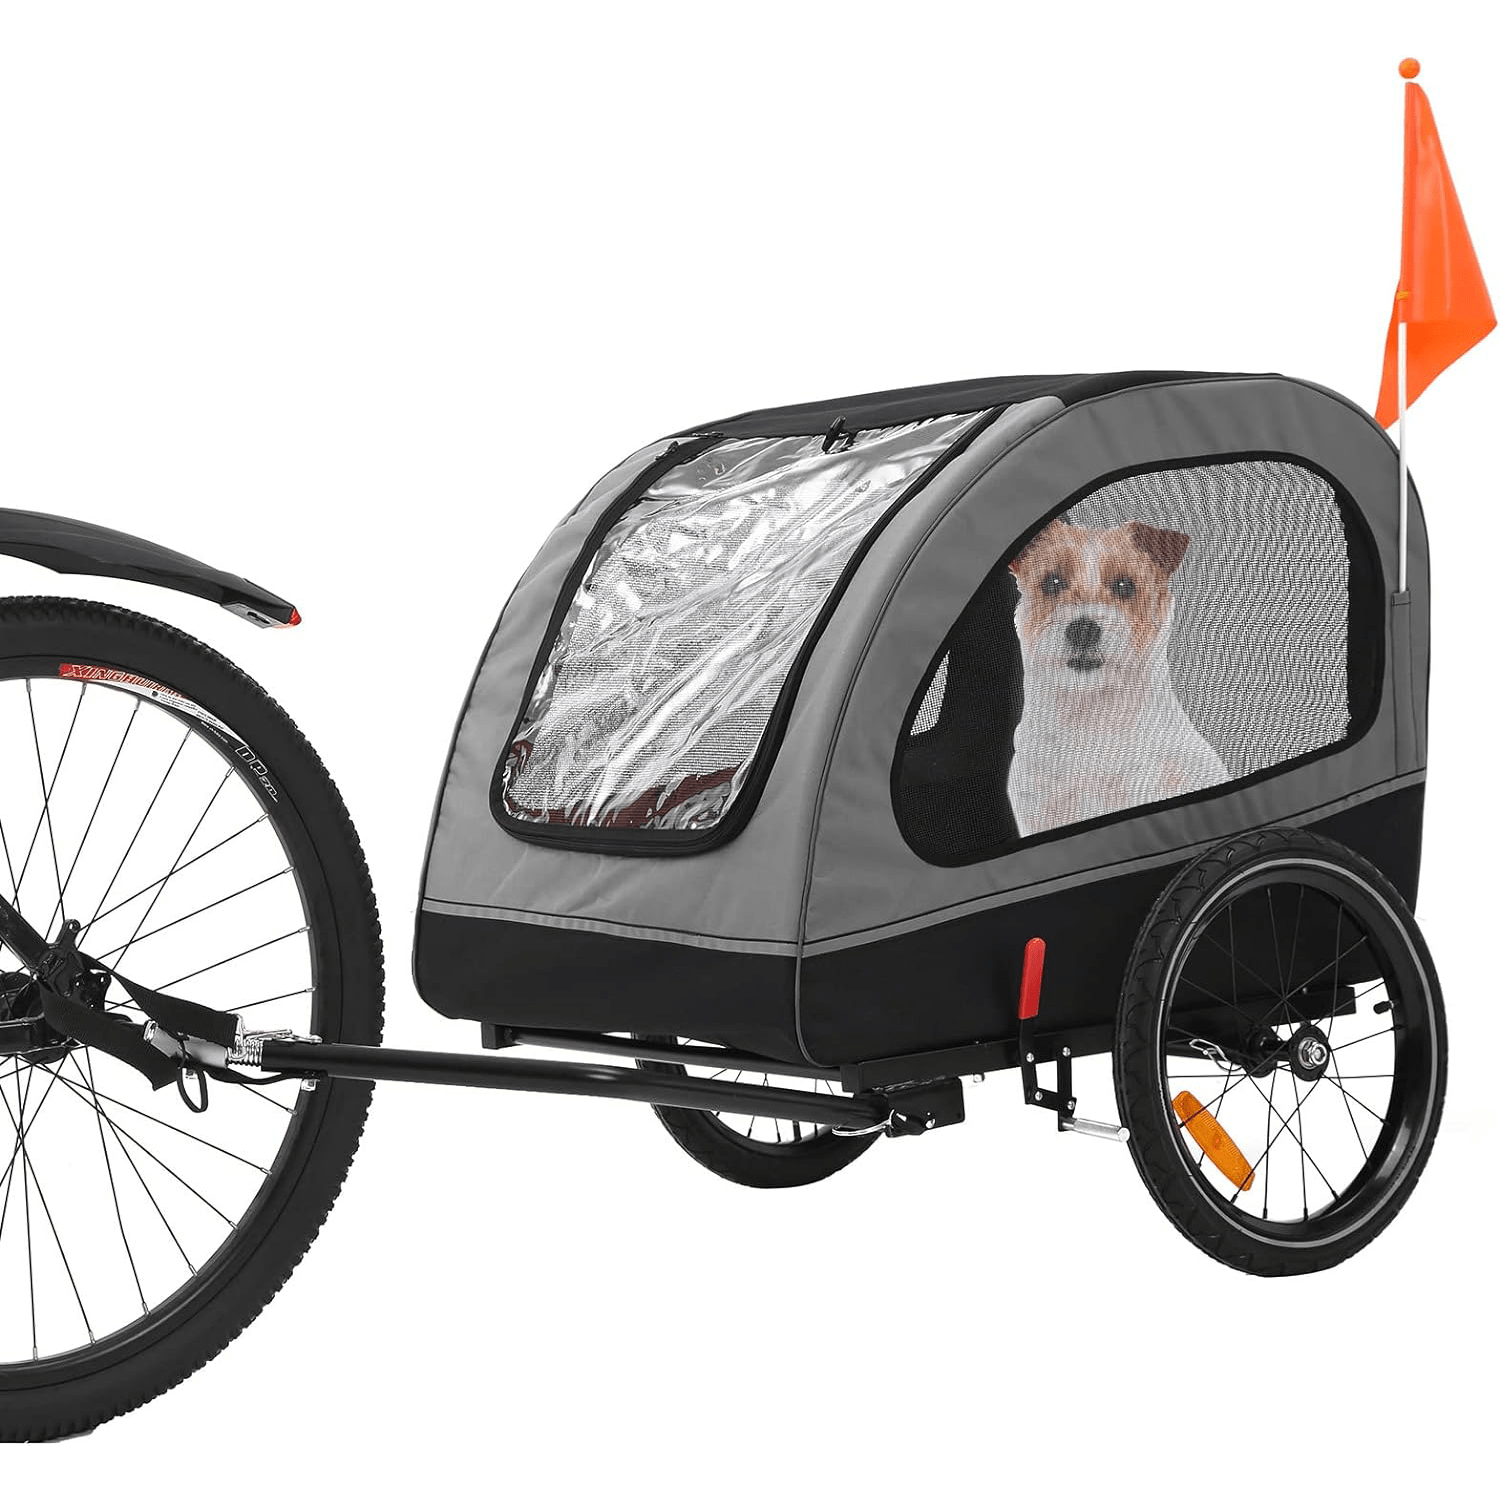 

Dog Bike Trailer, Dog Buggy For Bicycle, Suitable For Small And Medium Pets Up To 88lbs